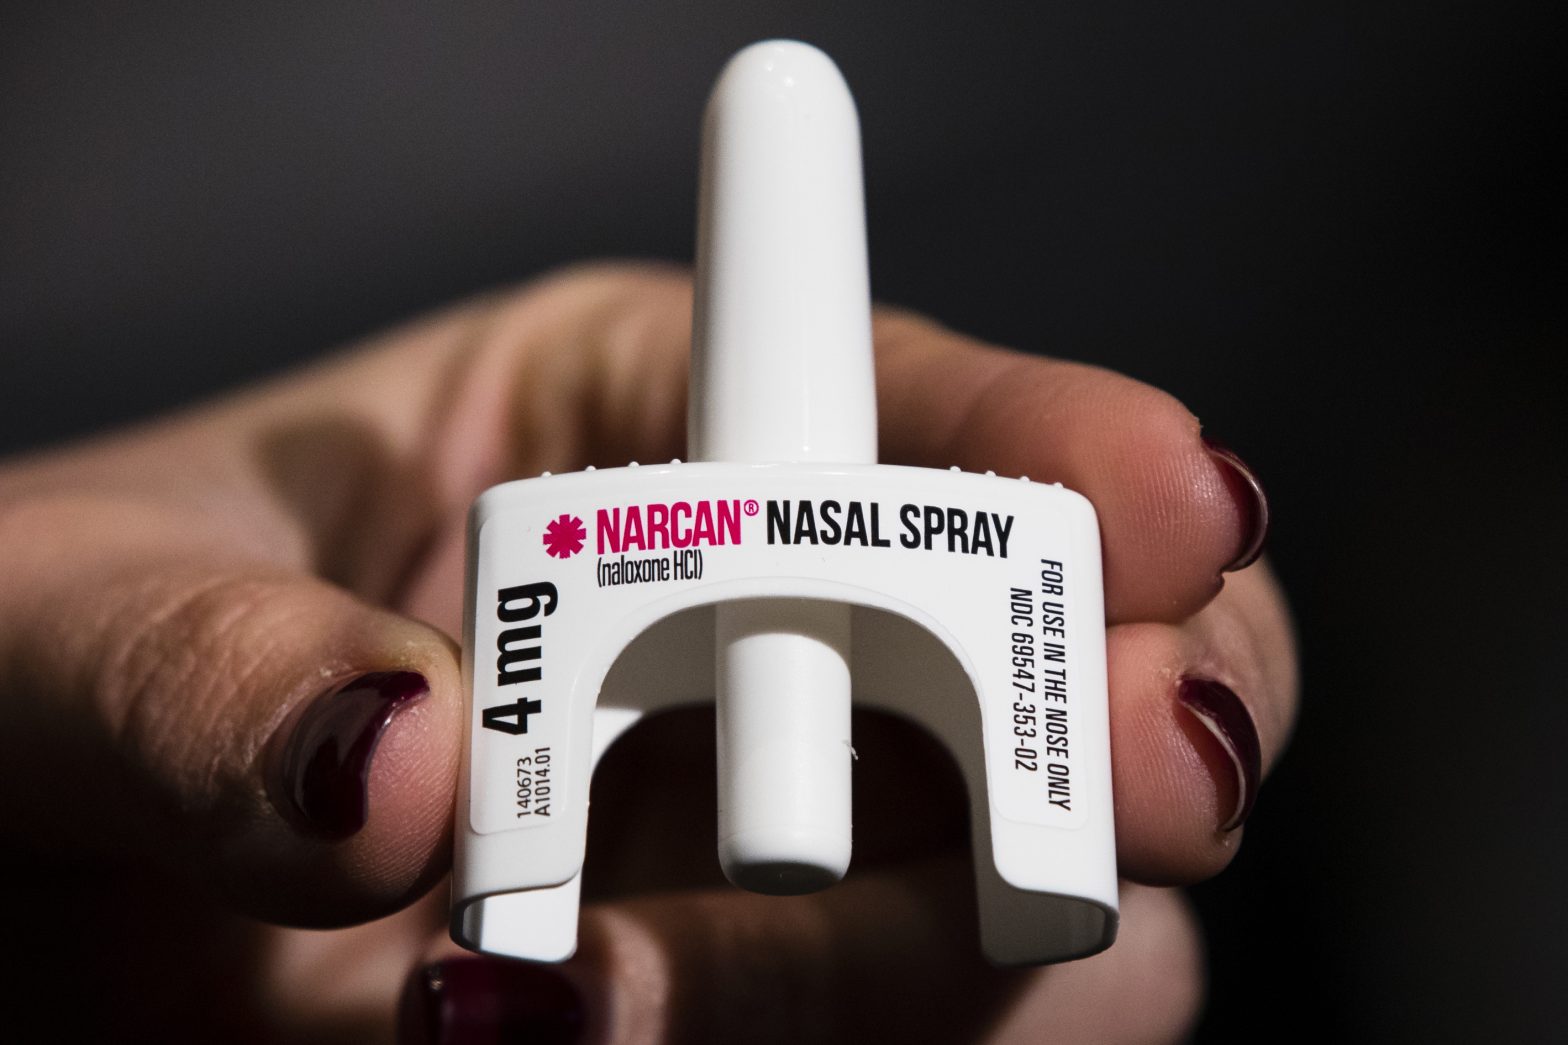 FDA Approves Narcan for Over-the-Counter Sales